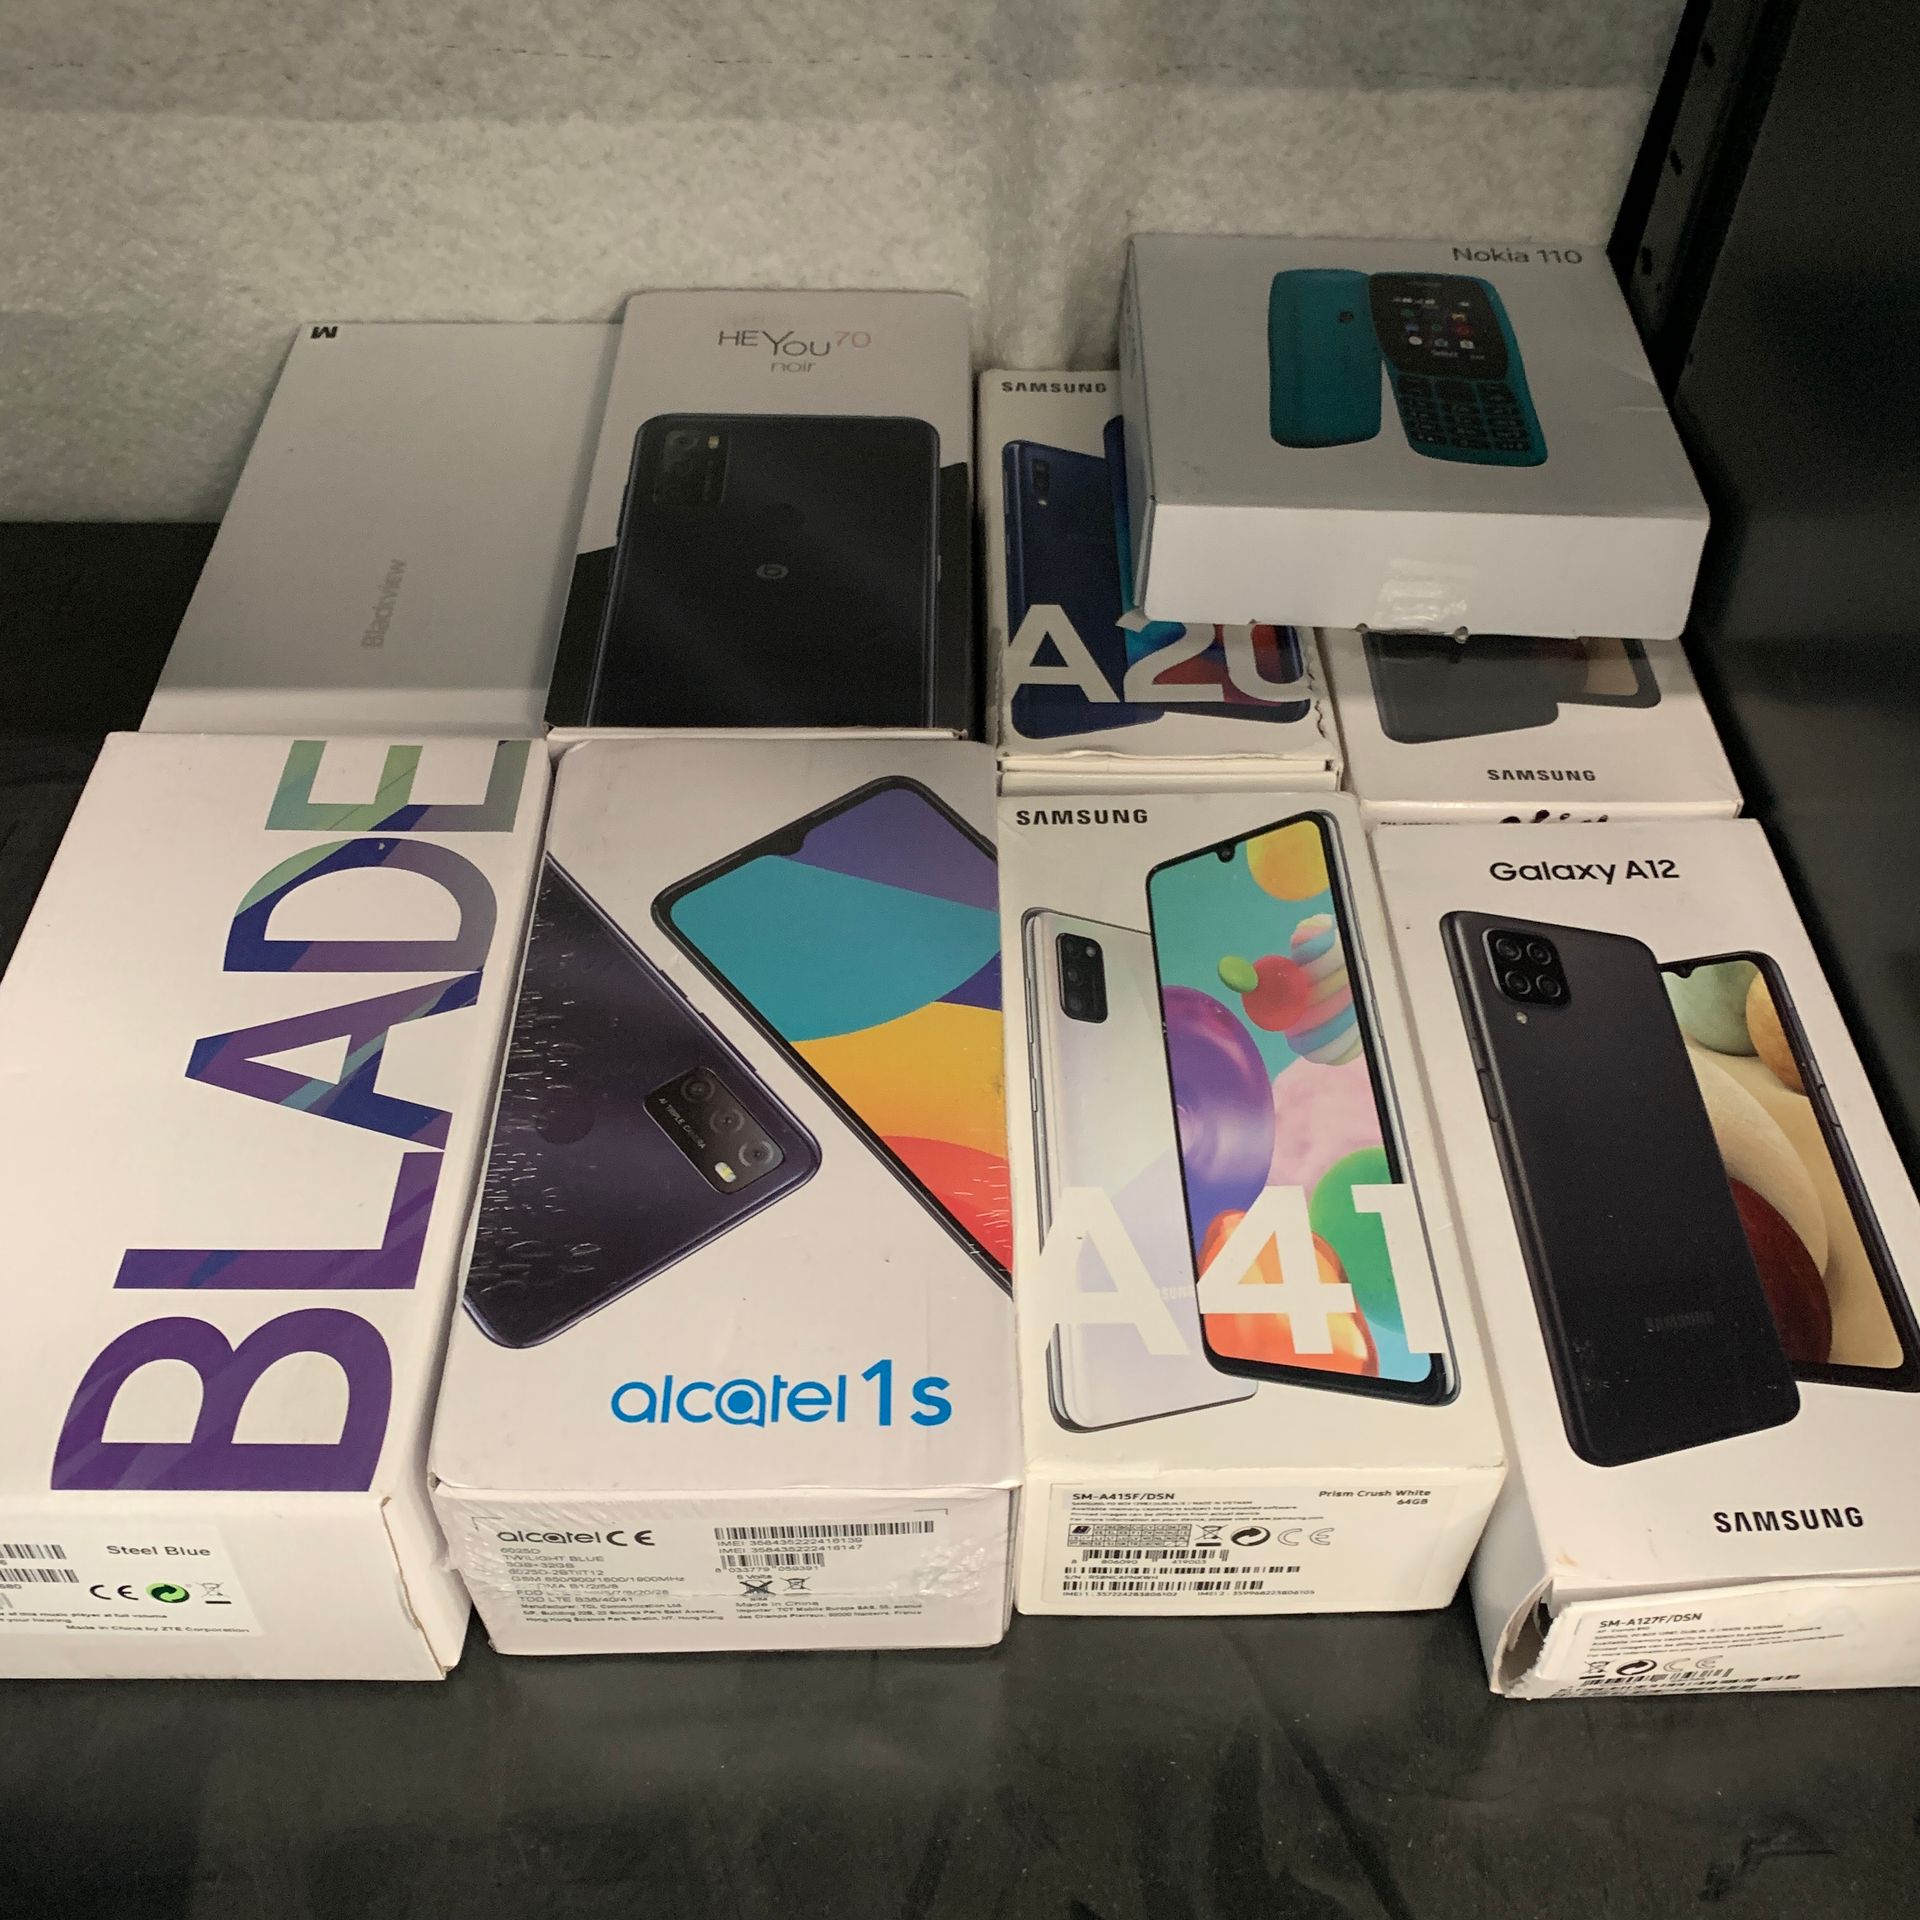 Null Lot of 9 new smartphones: 2 SAMSUNG Galaxy A12, 2 SAMSUNG A20e and A41, 1 H&hellip;